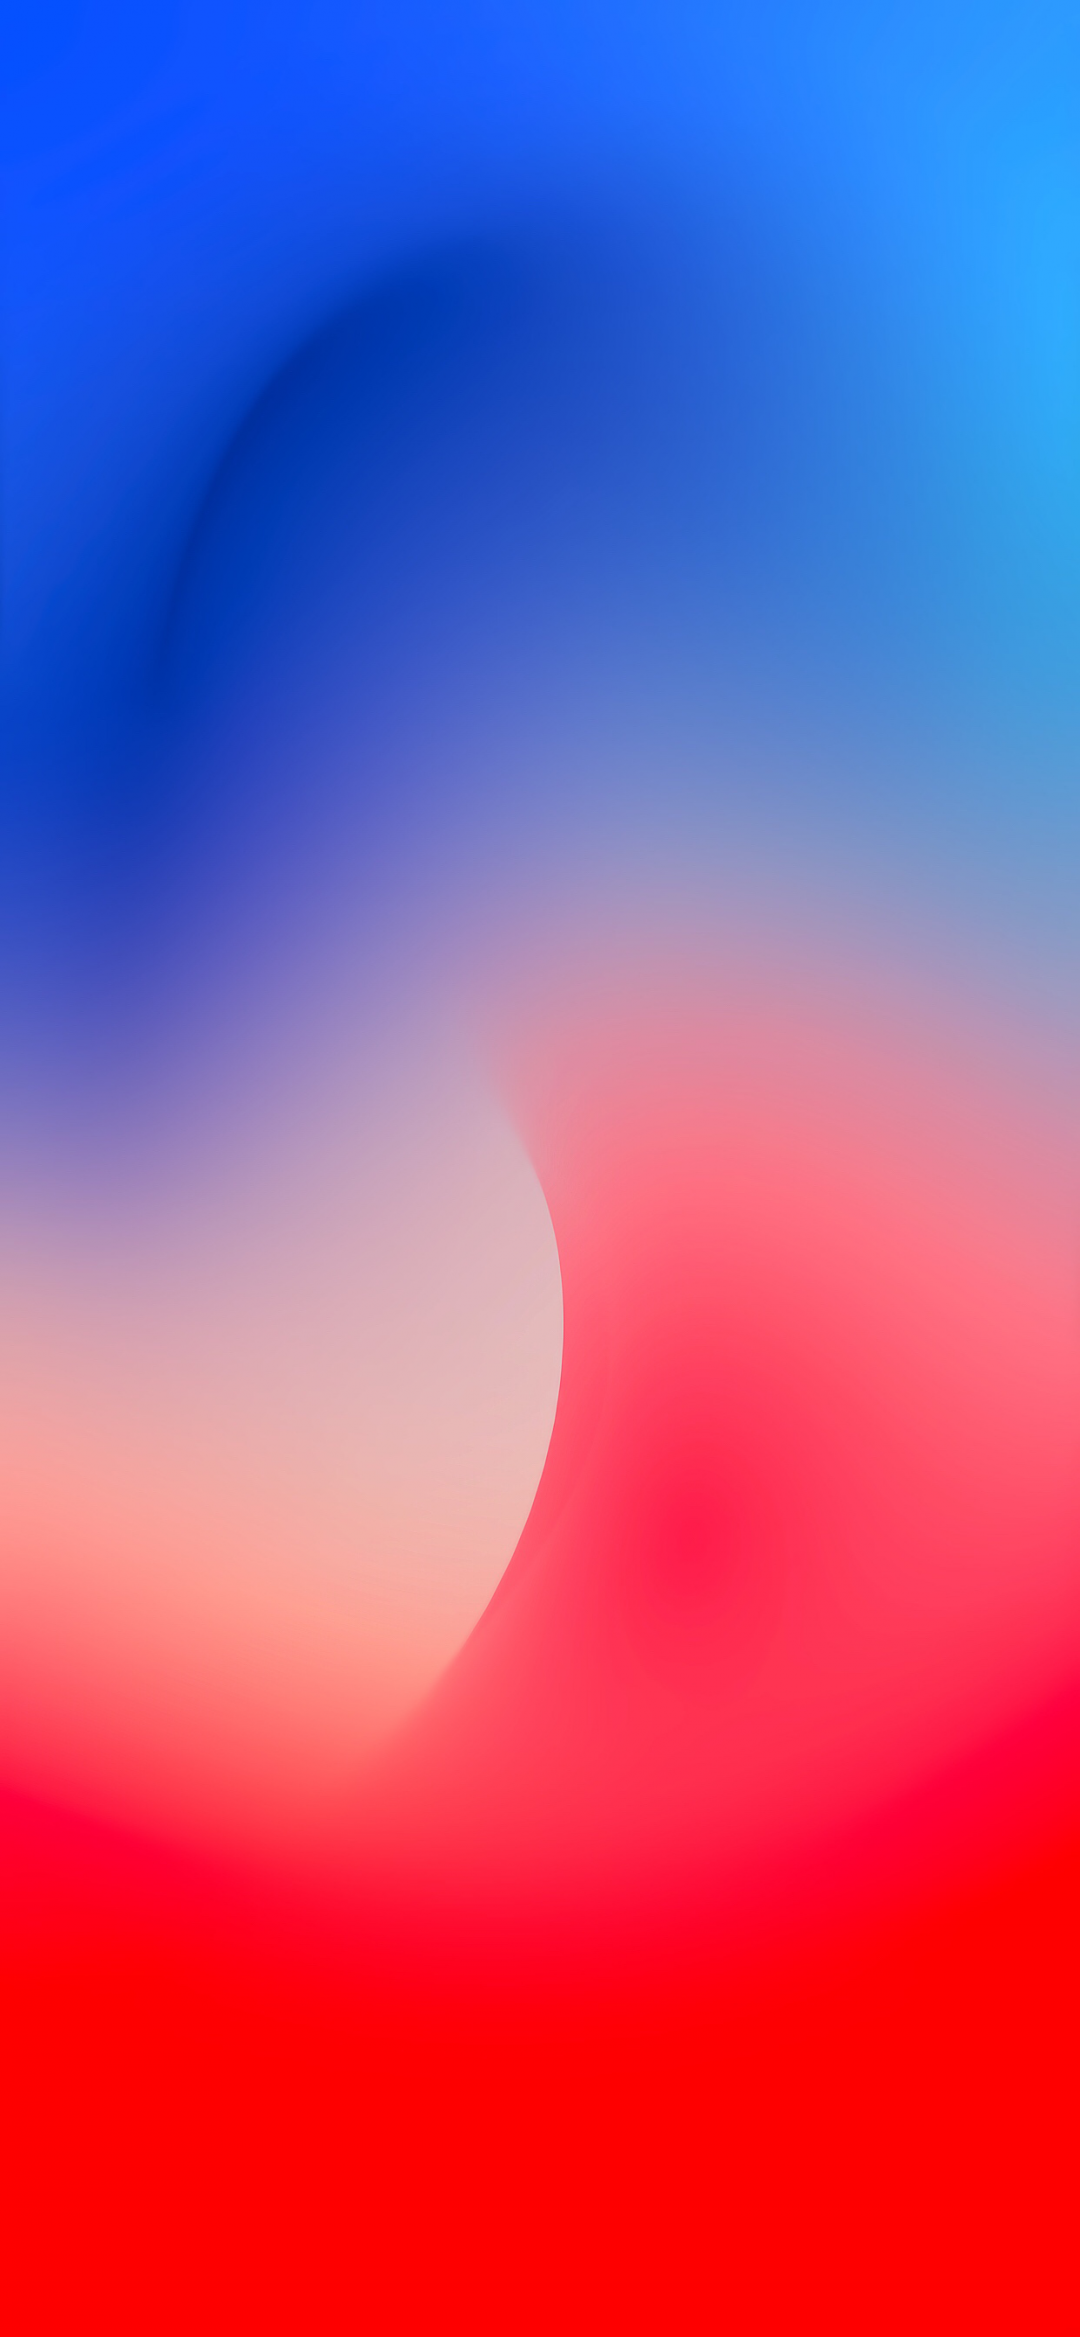 Fluid Blue and Red by @AR72014 | Zollotech